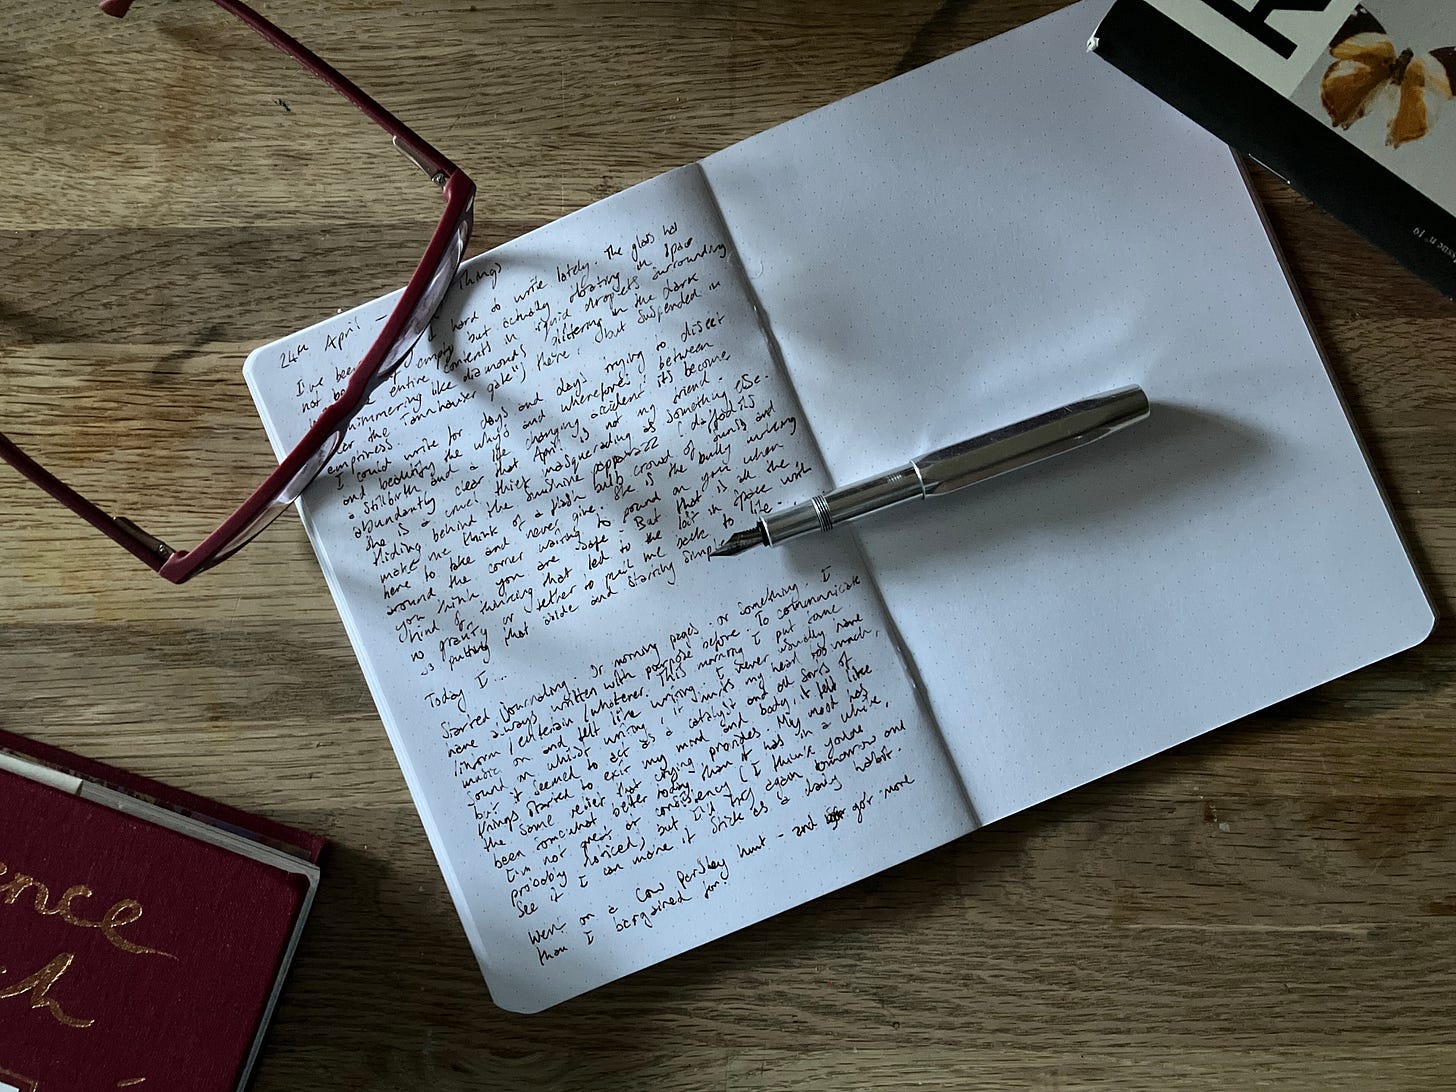 An half written journal lies atop a table with a pair of spectacles and a fountain pen resting on it